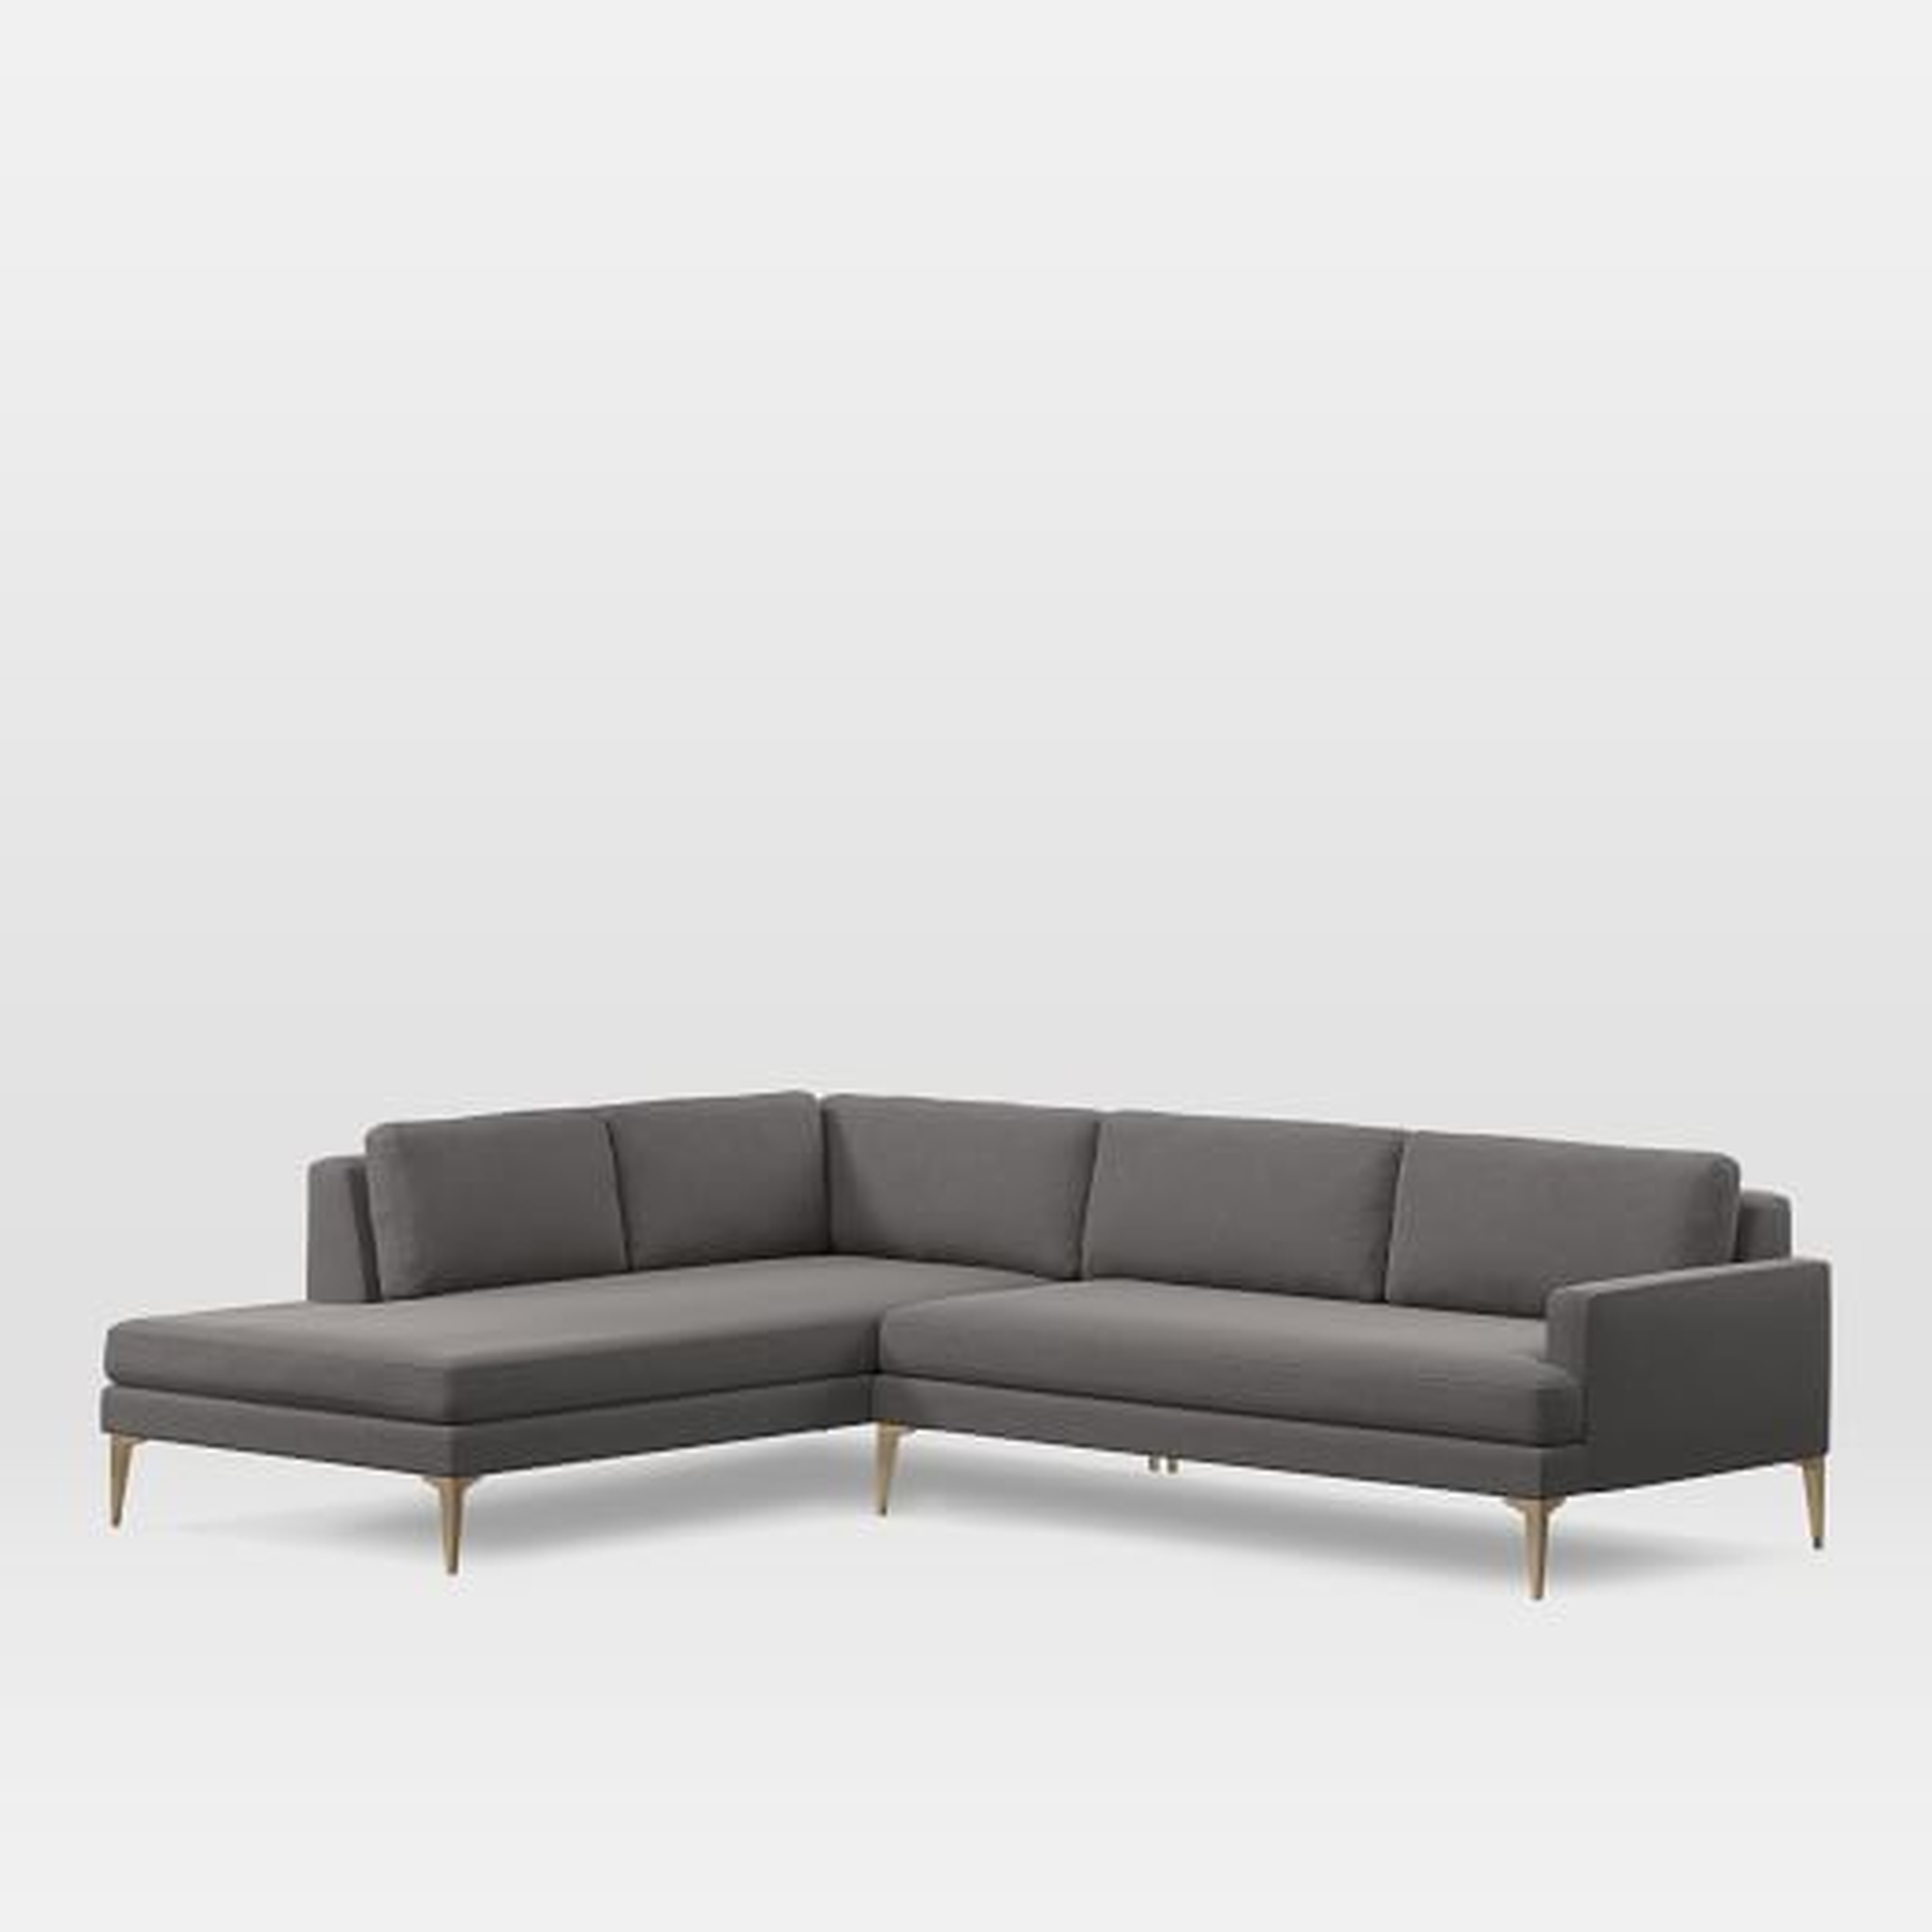 Andes Terminal Chaise Sectional, extra Large, Left Terminal Chaise 2 Piece Sectional,Marled Microfiber, Heather Gray blackened brass , Standard Depth - West Elm